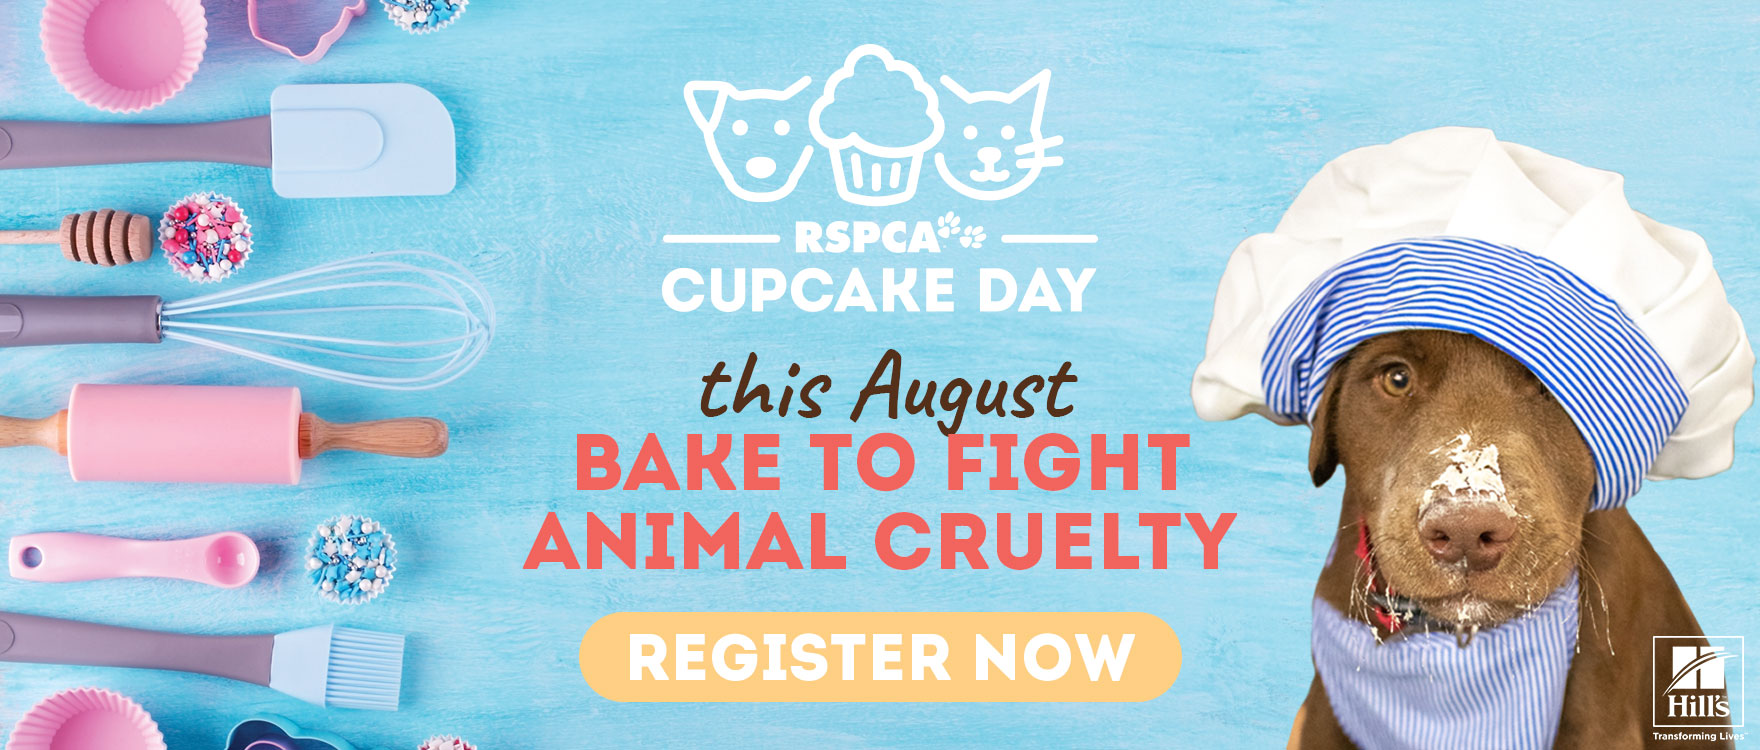 Bake for change - Register for Cupcake Day Now!